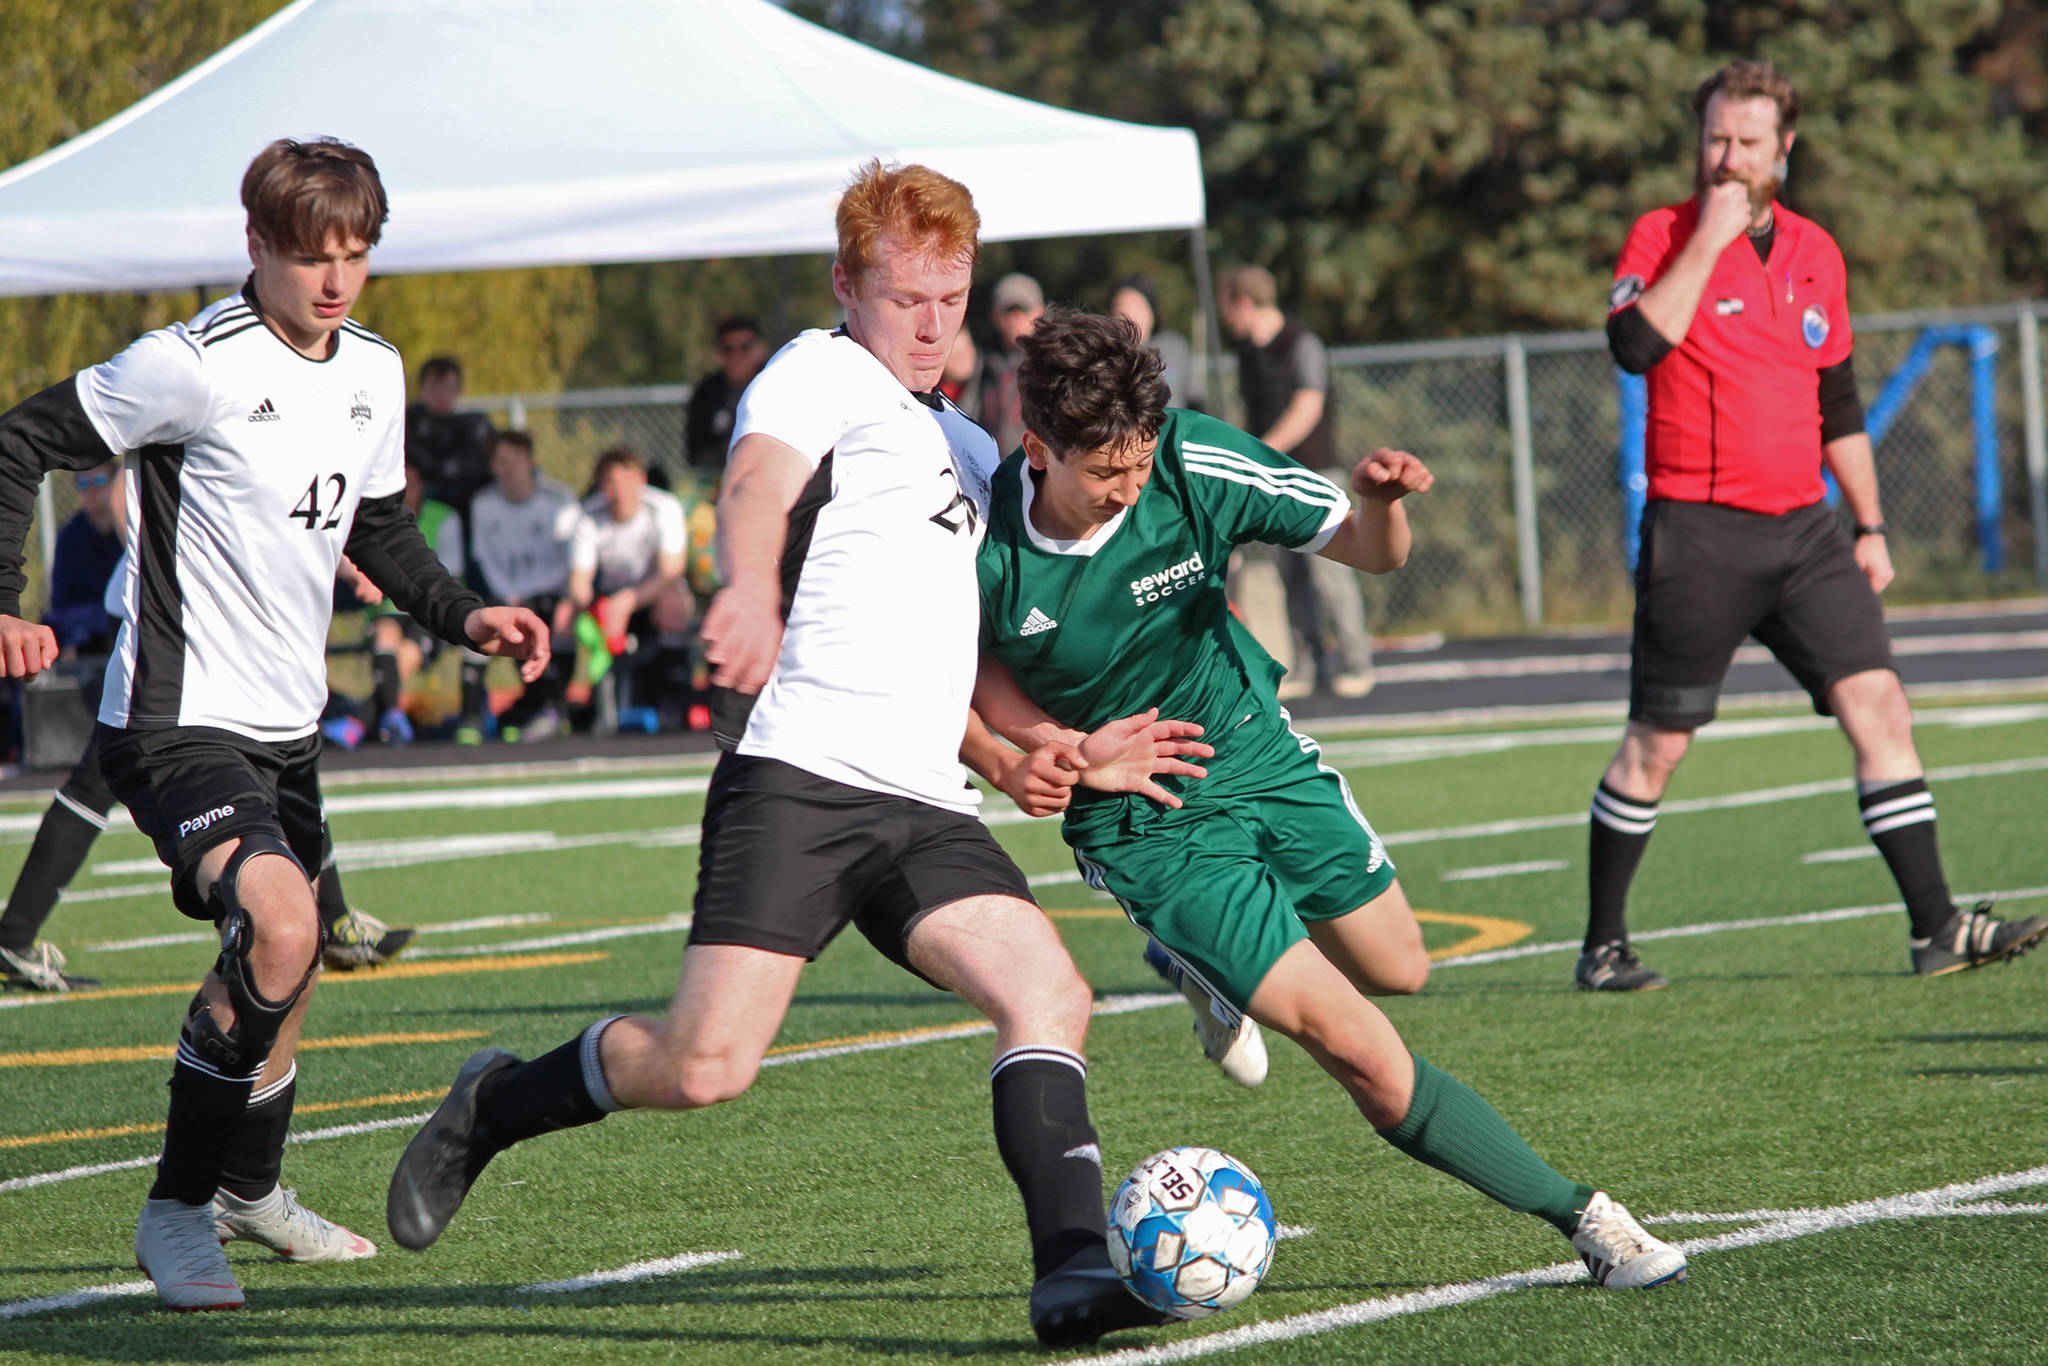 Nikiski’s Jace Kornstad (left) and Seward’s John Moriarty (right) battle for the ball during the first boys game of the Peninsula Conference Soccer Tournament held Thursday, May 16, 2019 at Homer High School in Homer, Alaska. (Photo by Megan Pacer/Homer News)